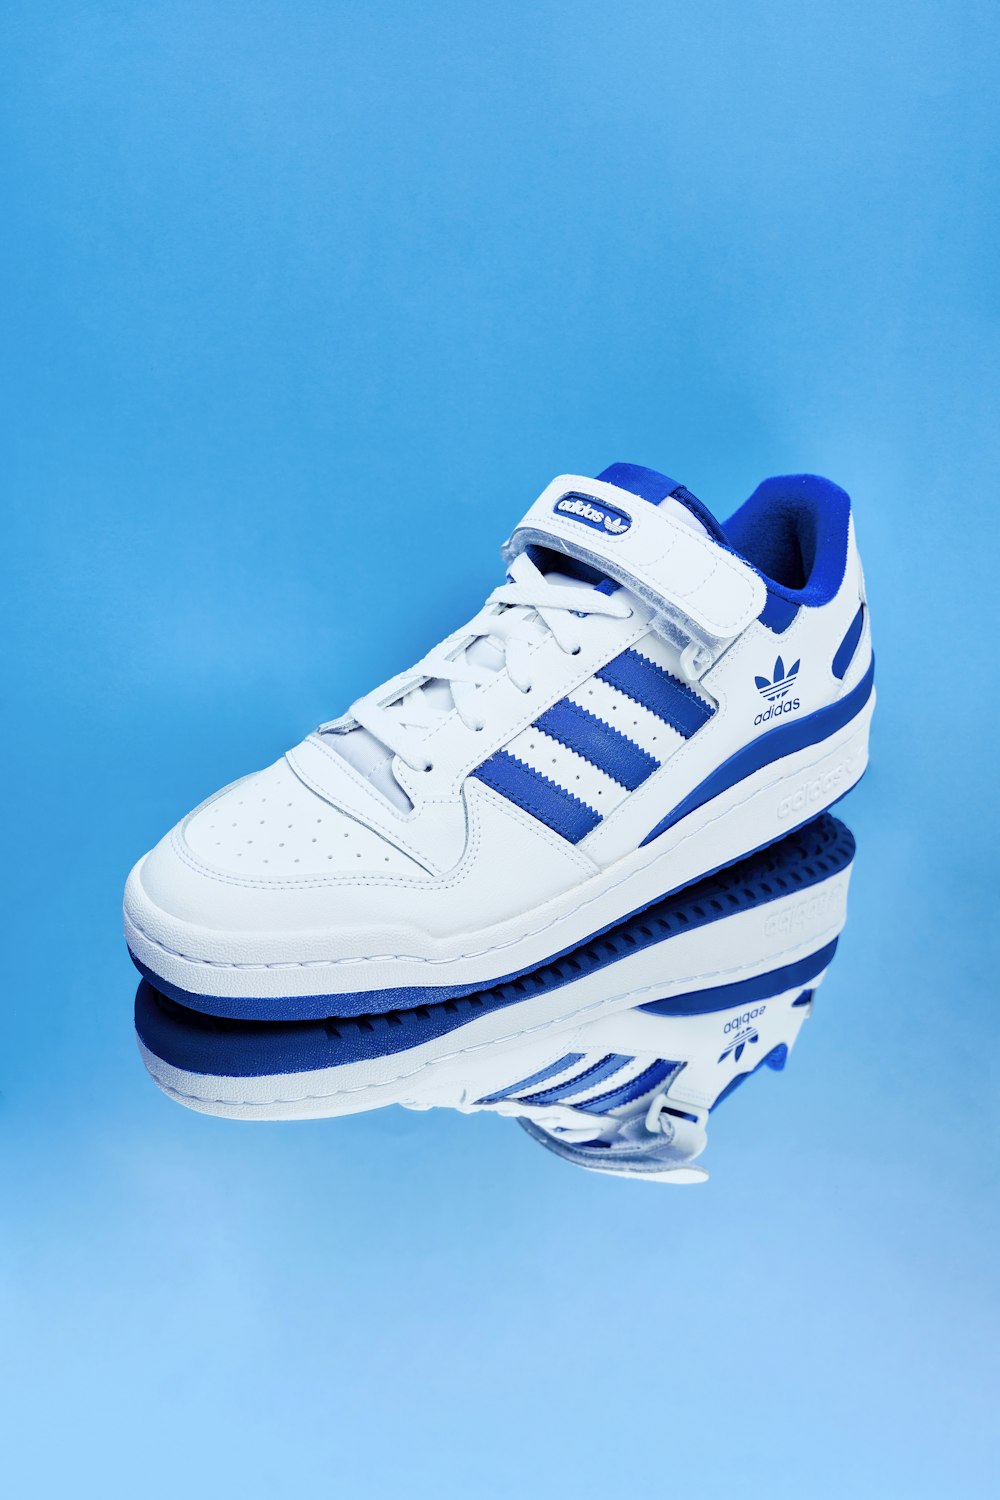 a pair of white and blue shoes on a blue background